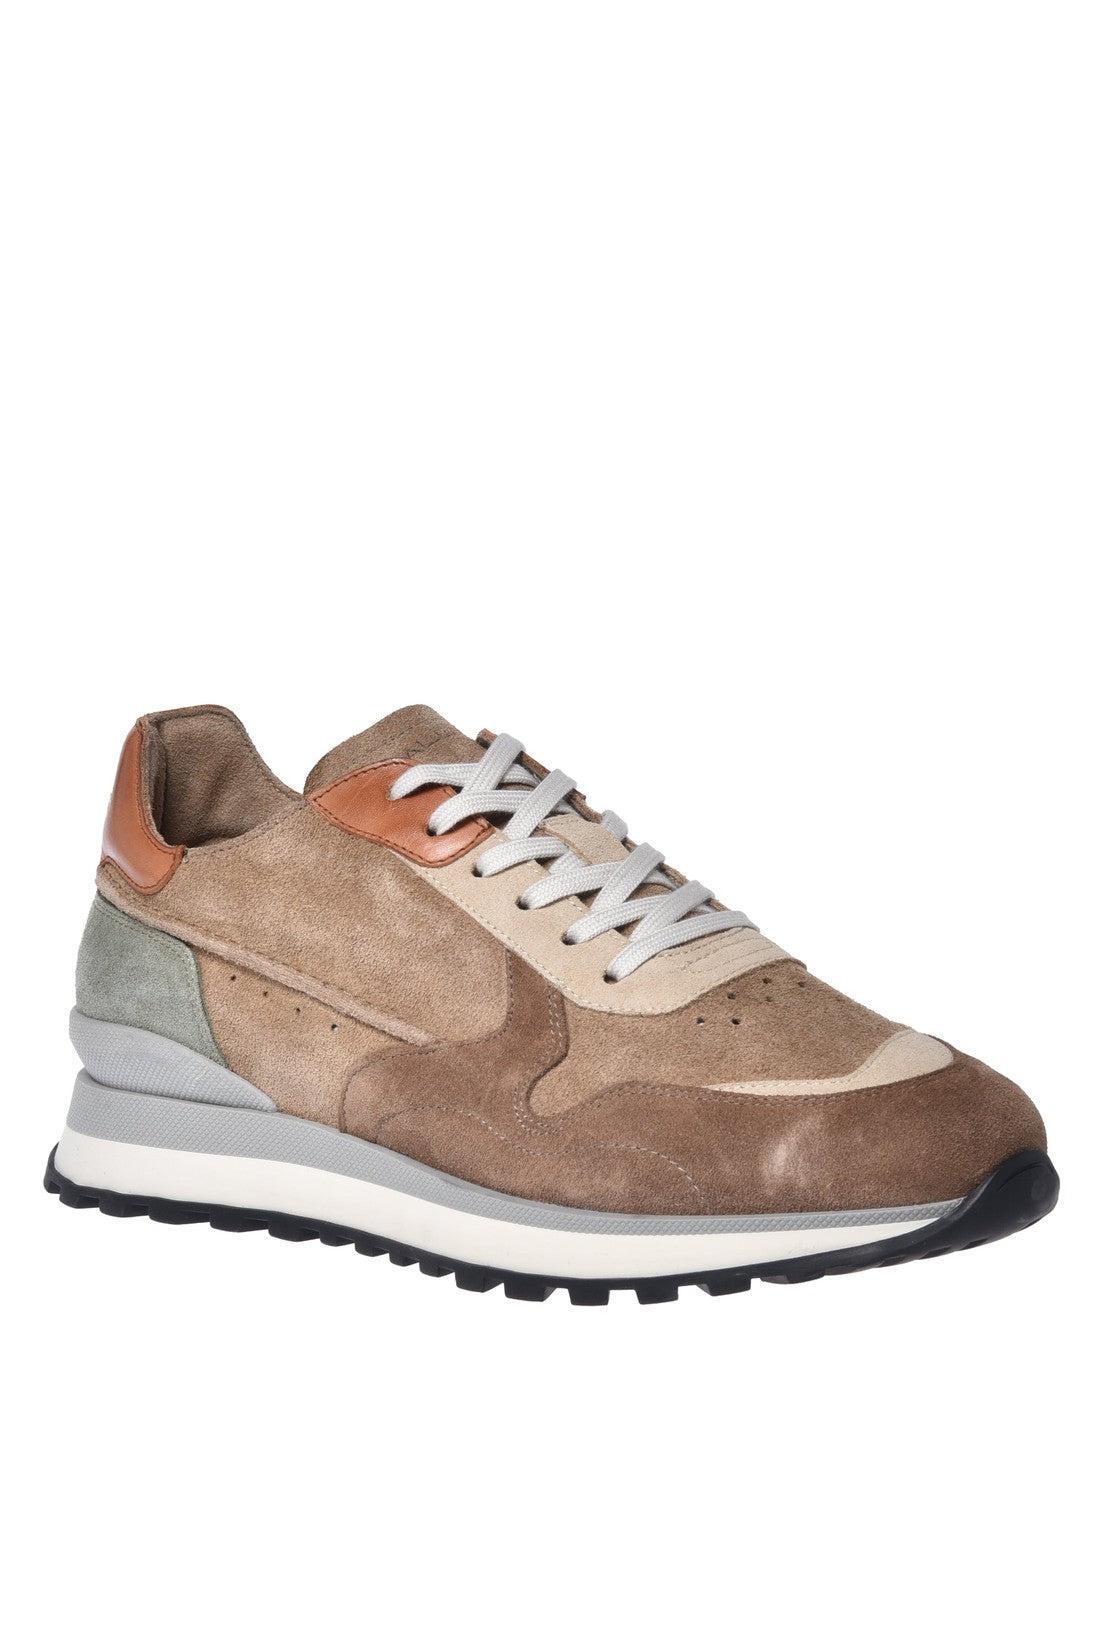 Sneaker in taupe and beige suede leather